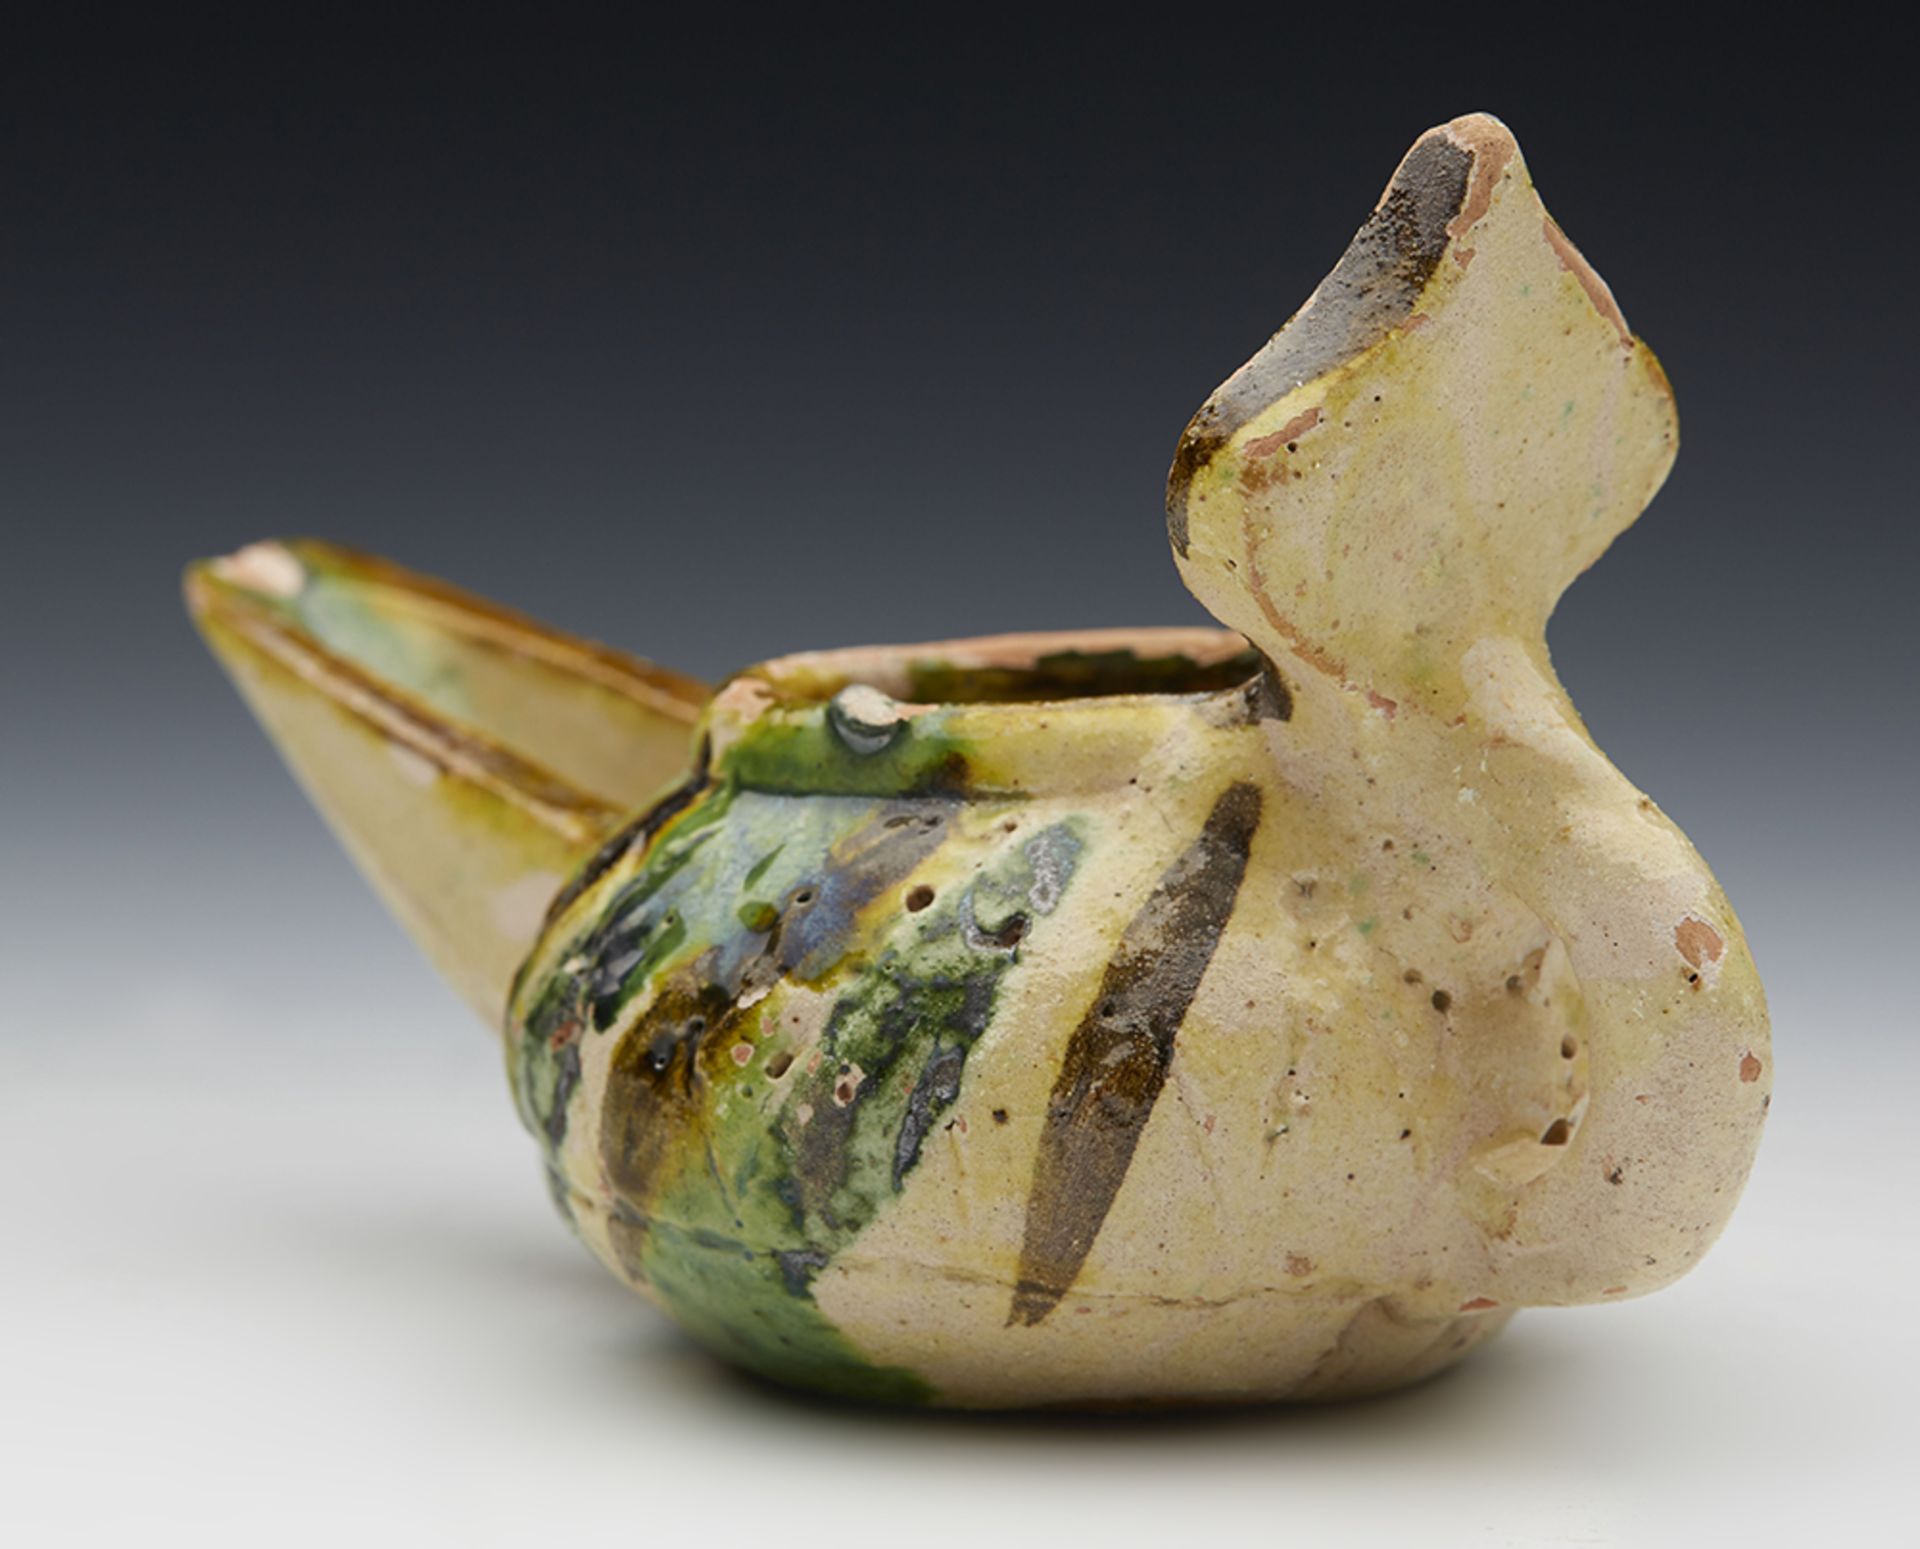 ISLAMIC ANTIQUITY GLAZED POTTERY OIL LAMP 10TH Ð 11TH C. - Image 3 of 7